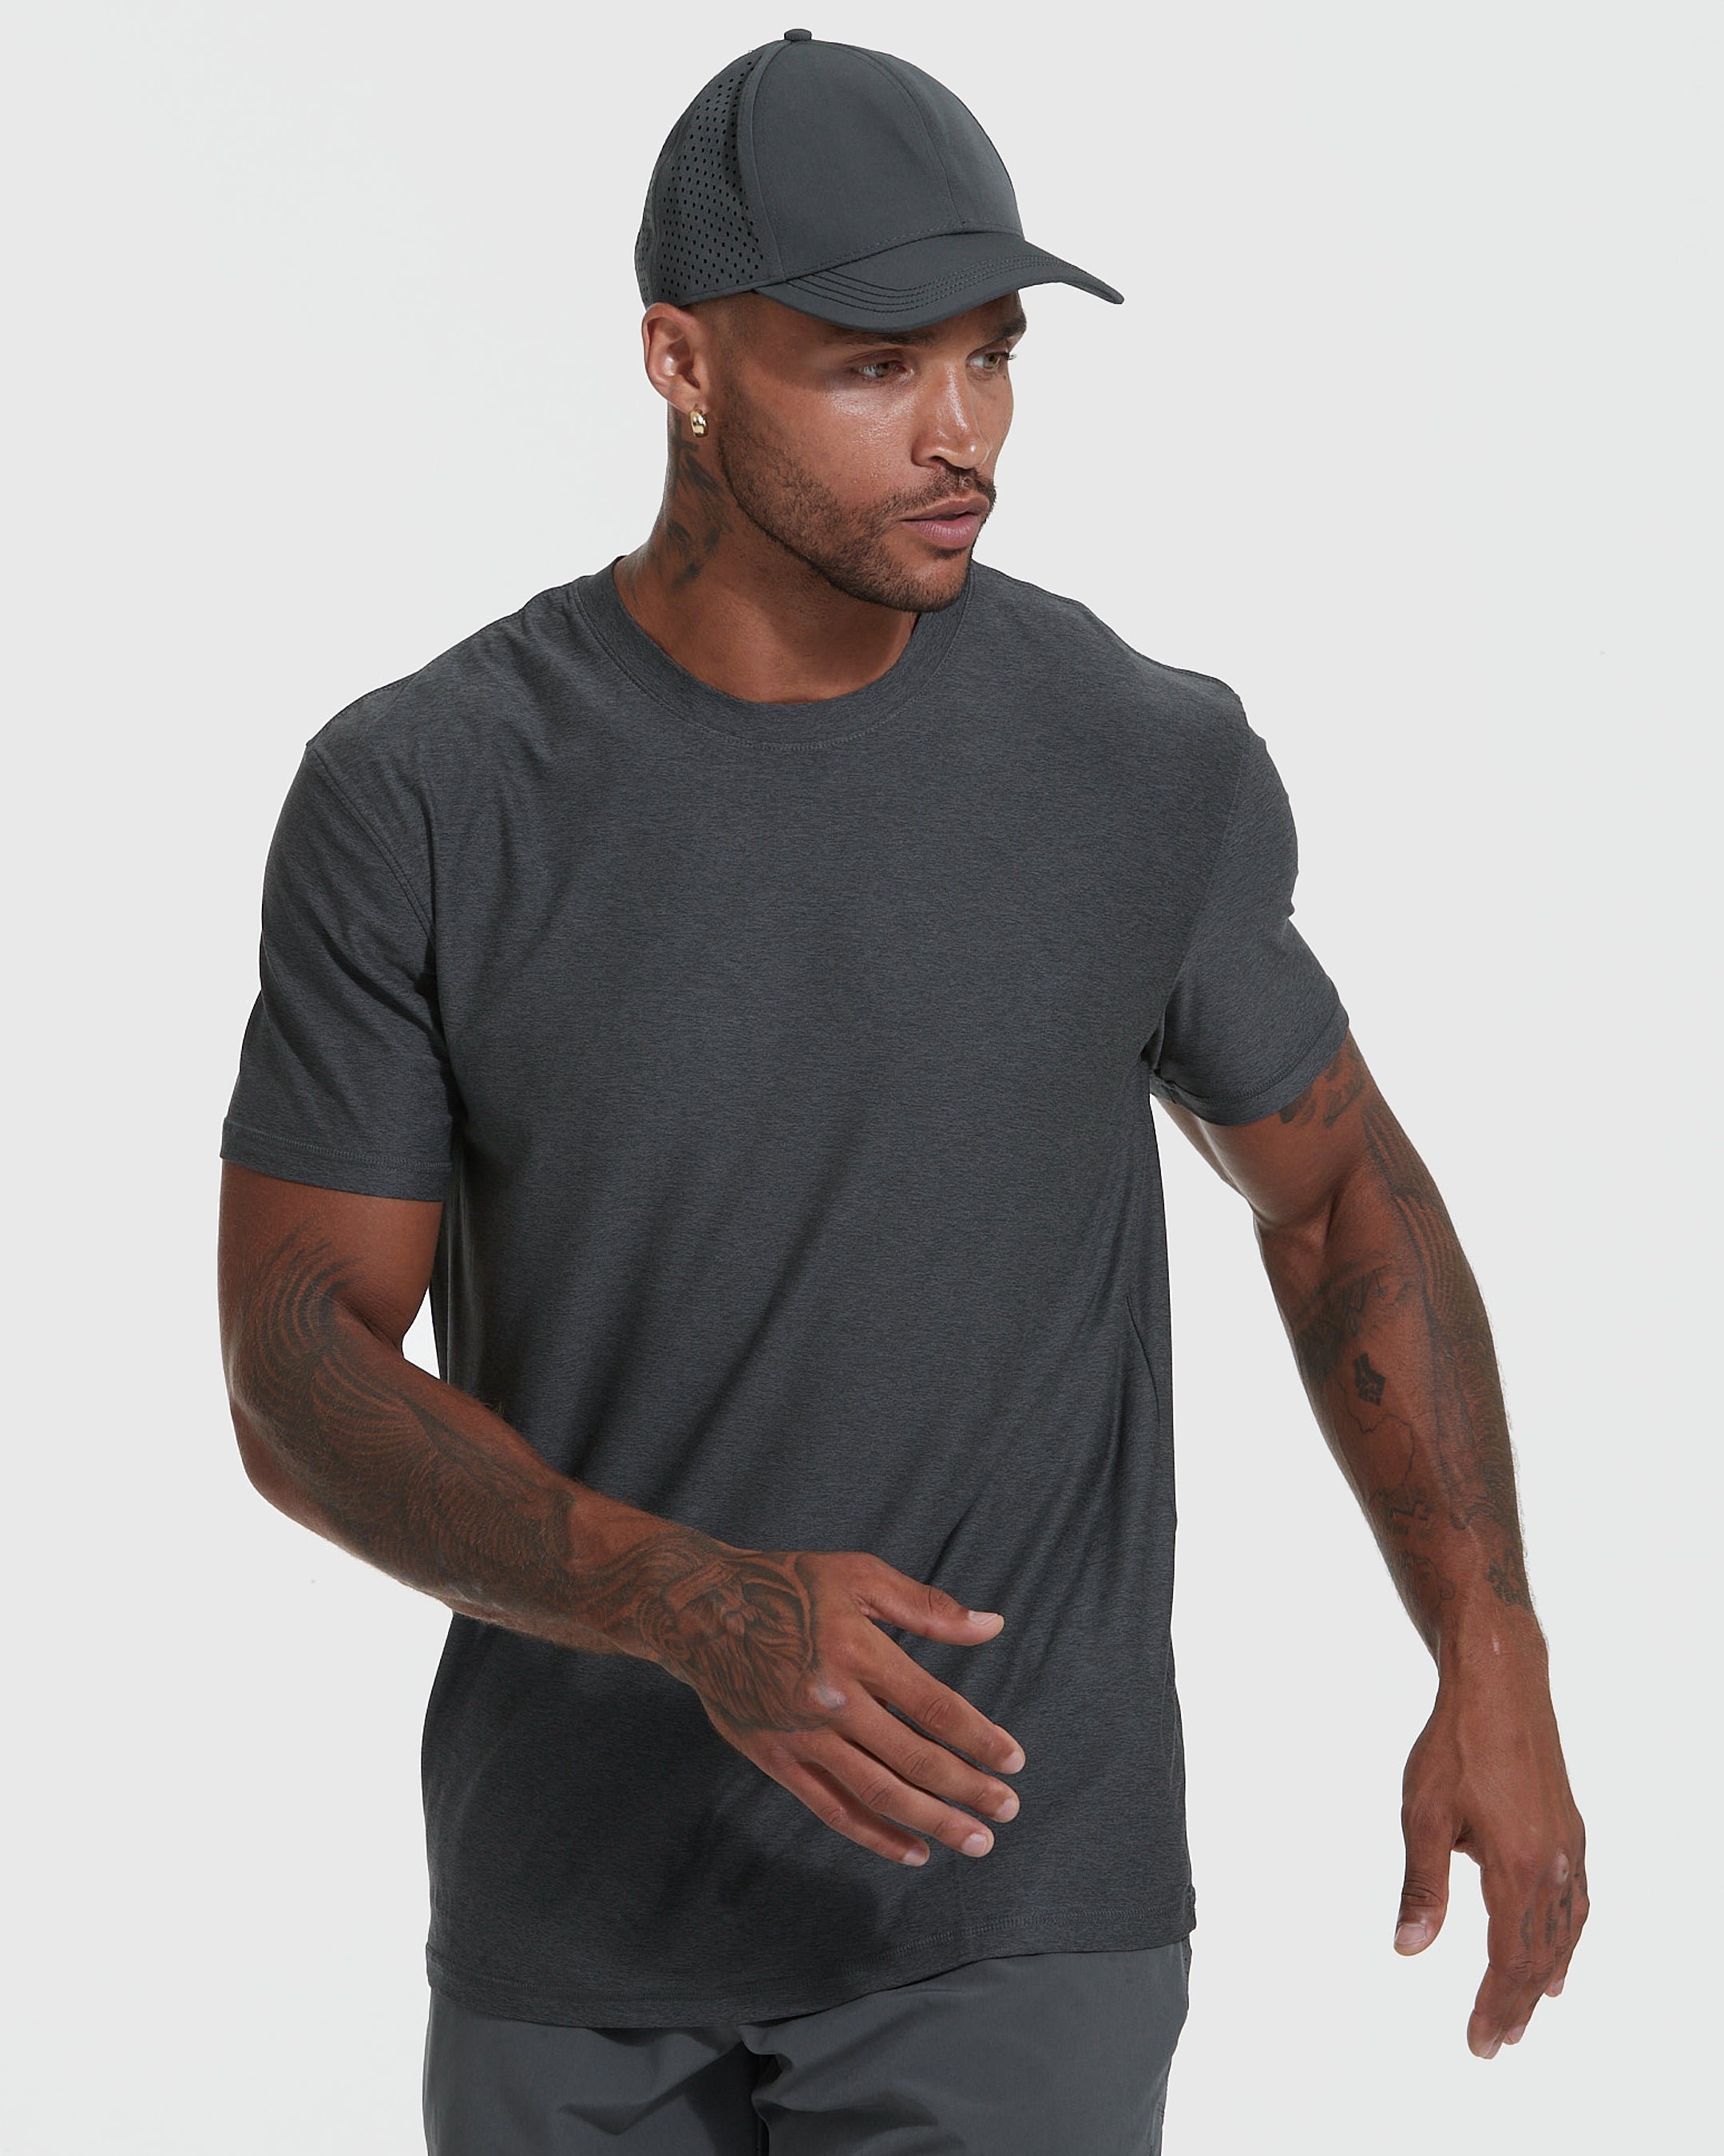 The Heather Color Active Crew Neck T-Shirt 3-Pack